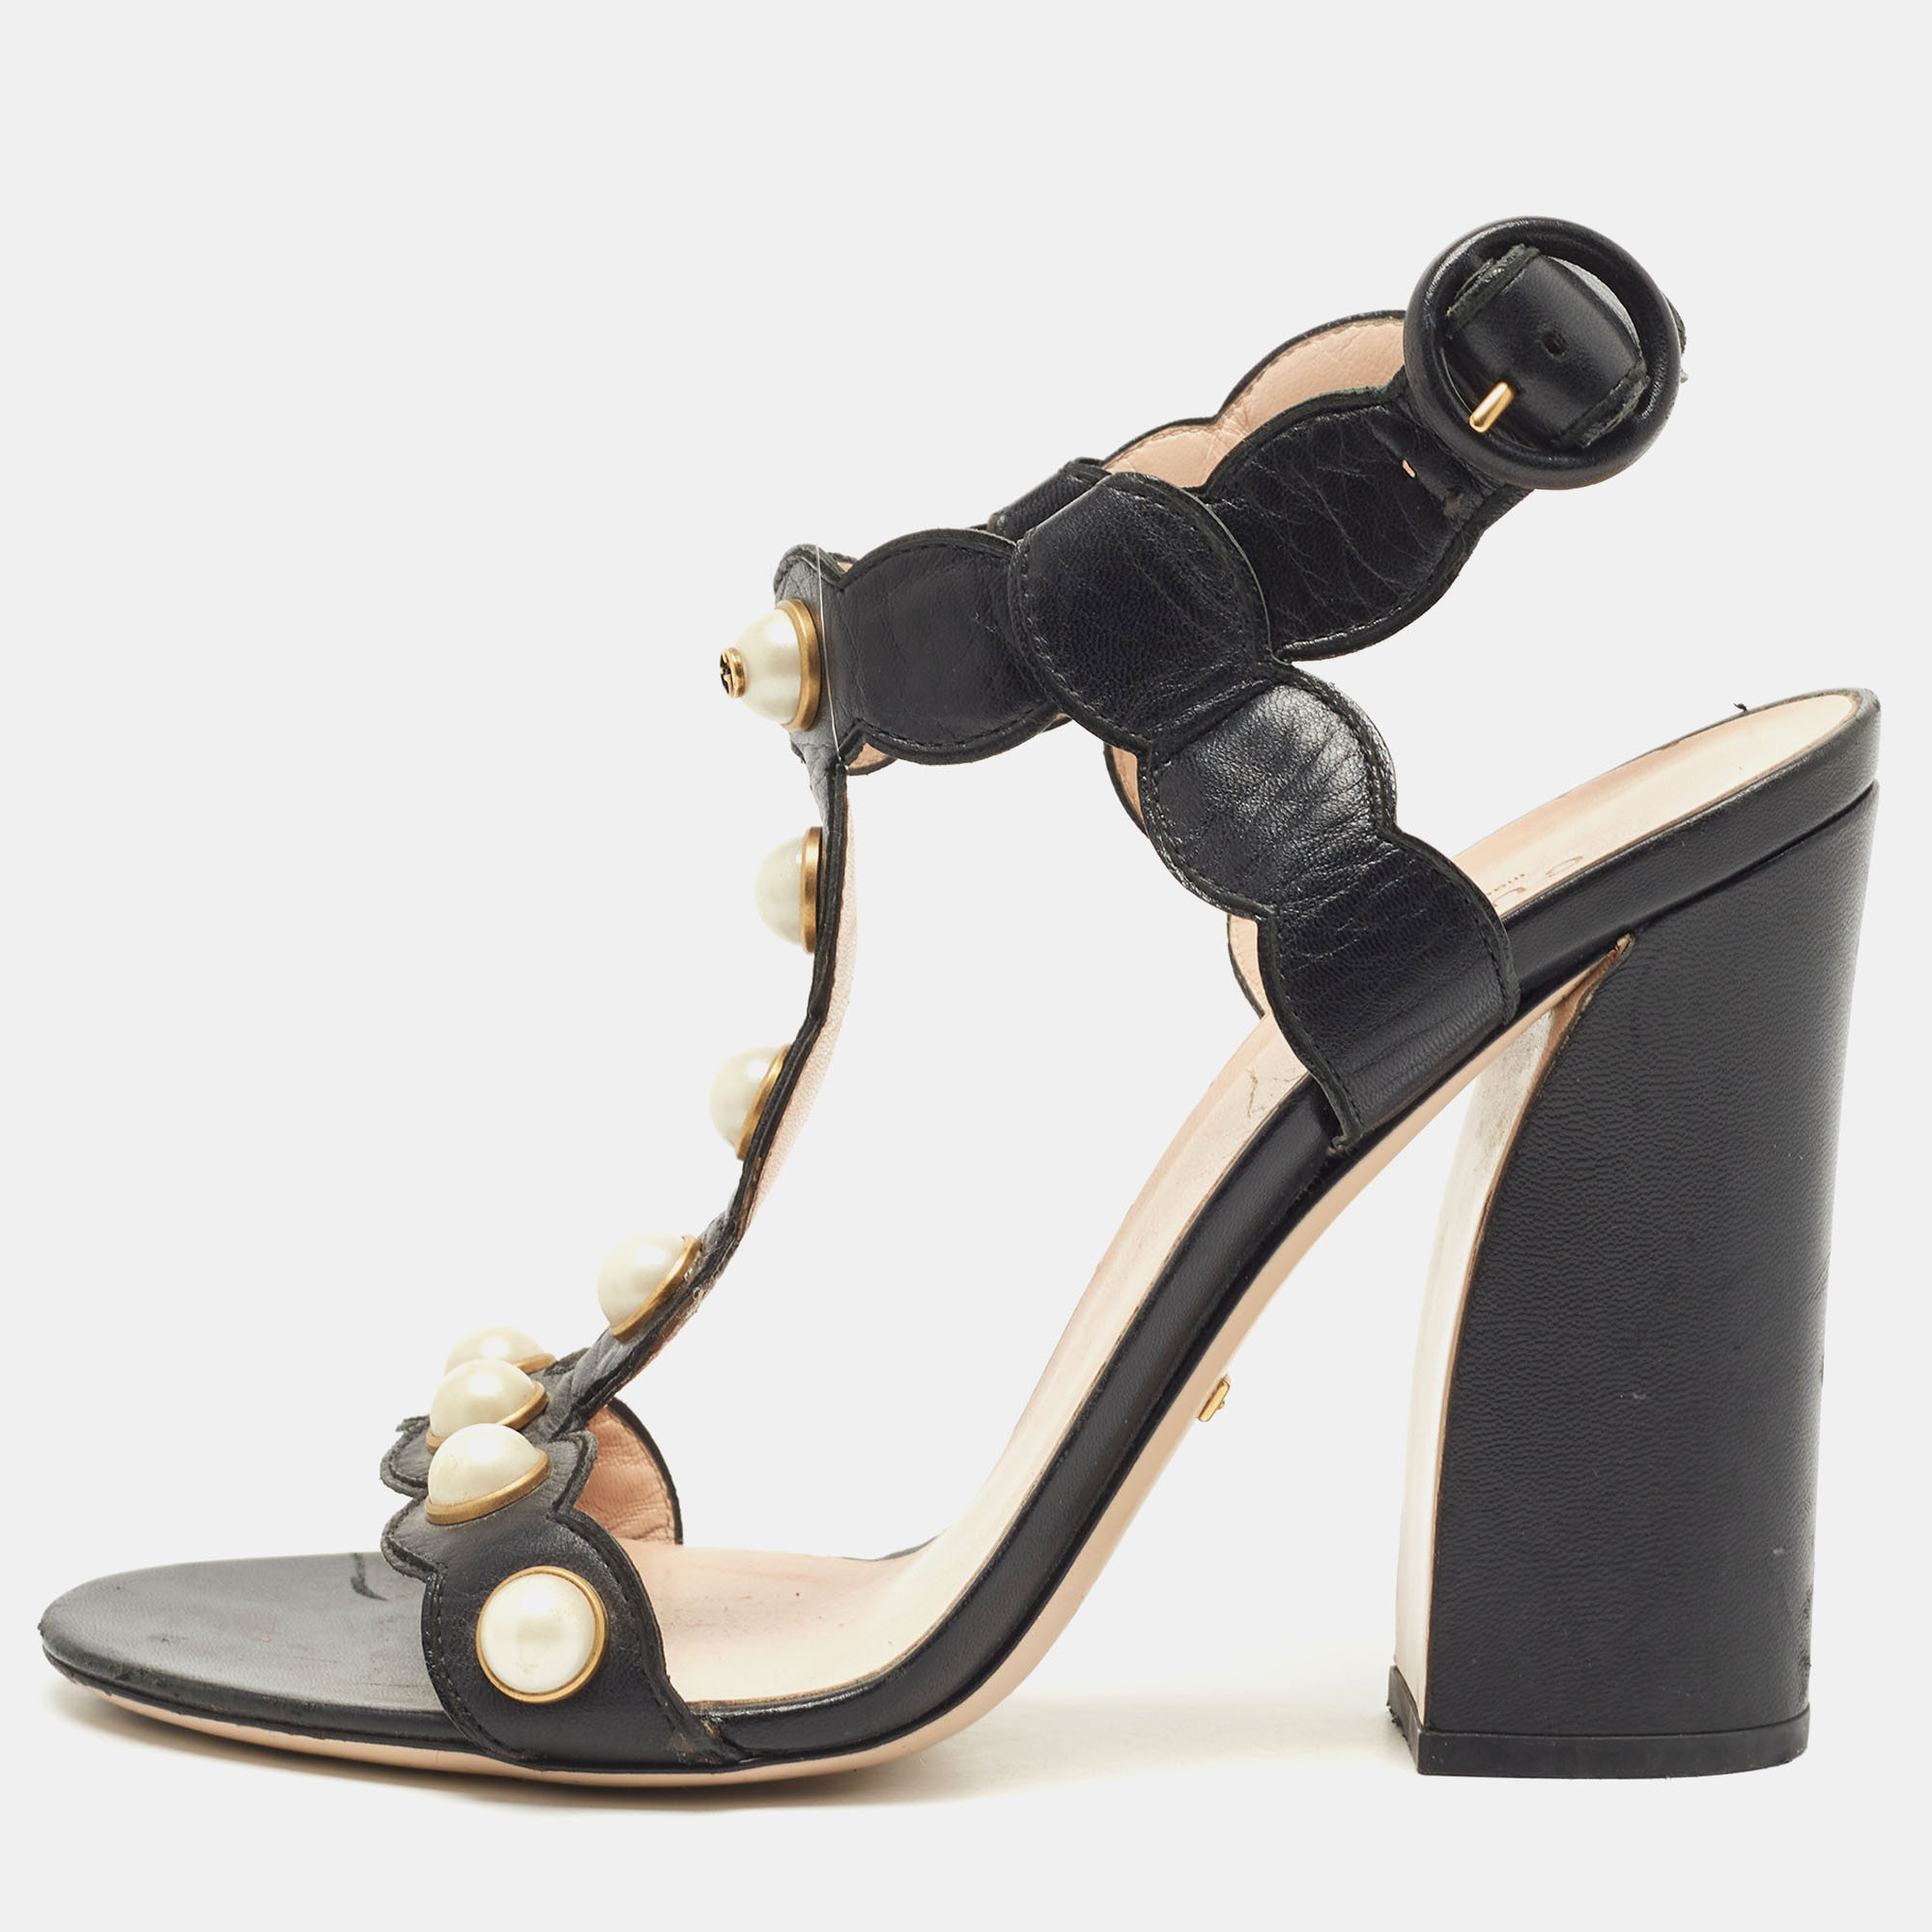 Gucci Black Leather Faux Pearl Willow T-Strap Sandals Size 39